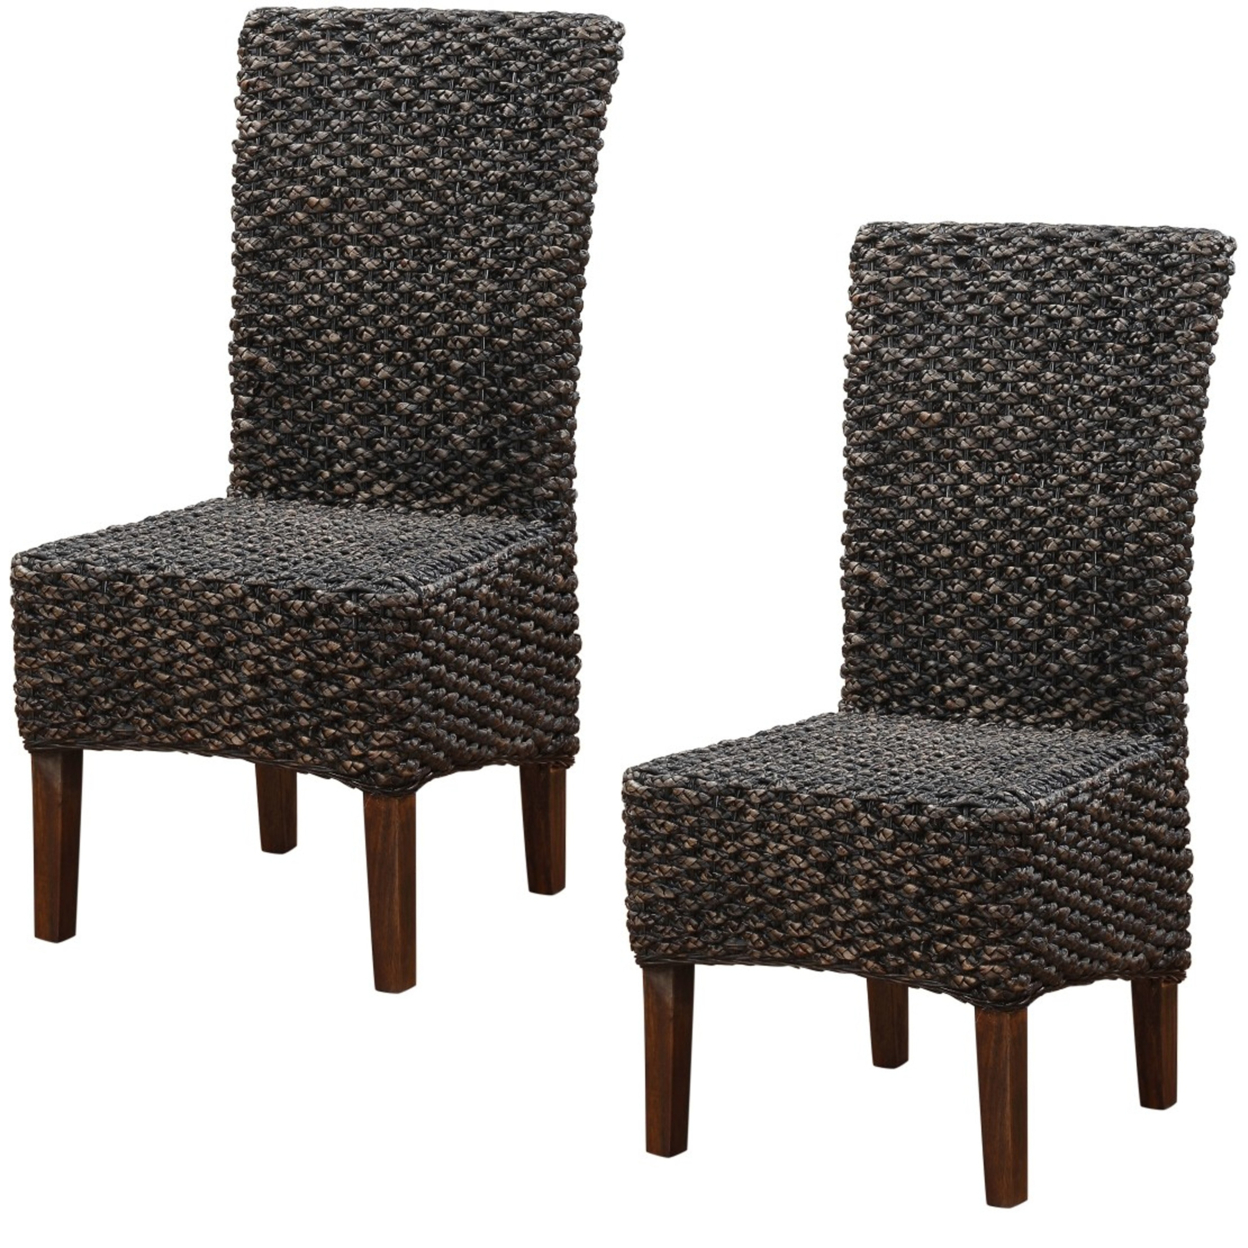 Wicker Woven Wooden Chair With High Back, Set Of 2, Brown- Saltoro Sherpi